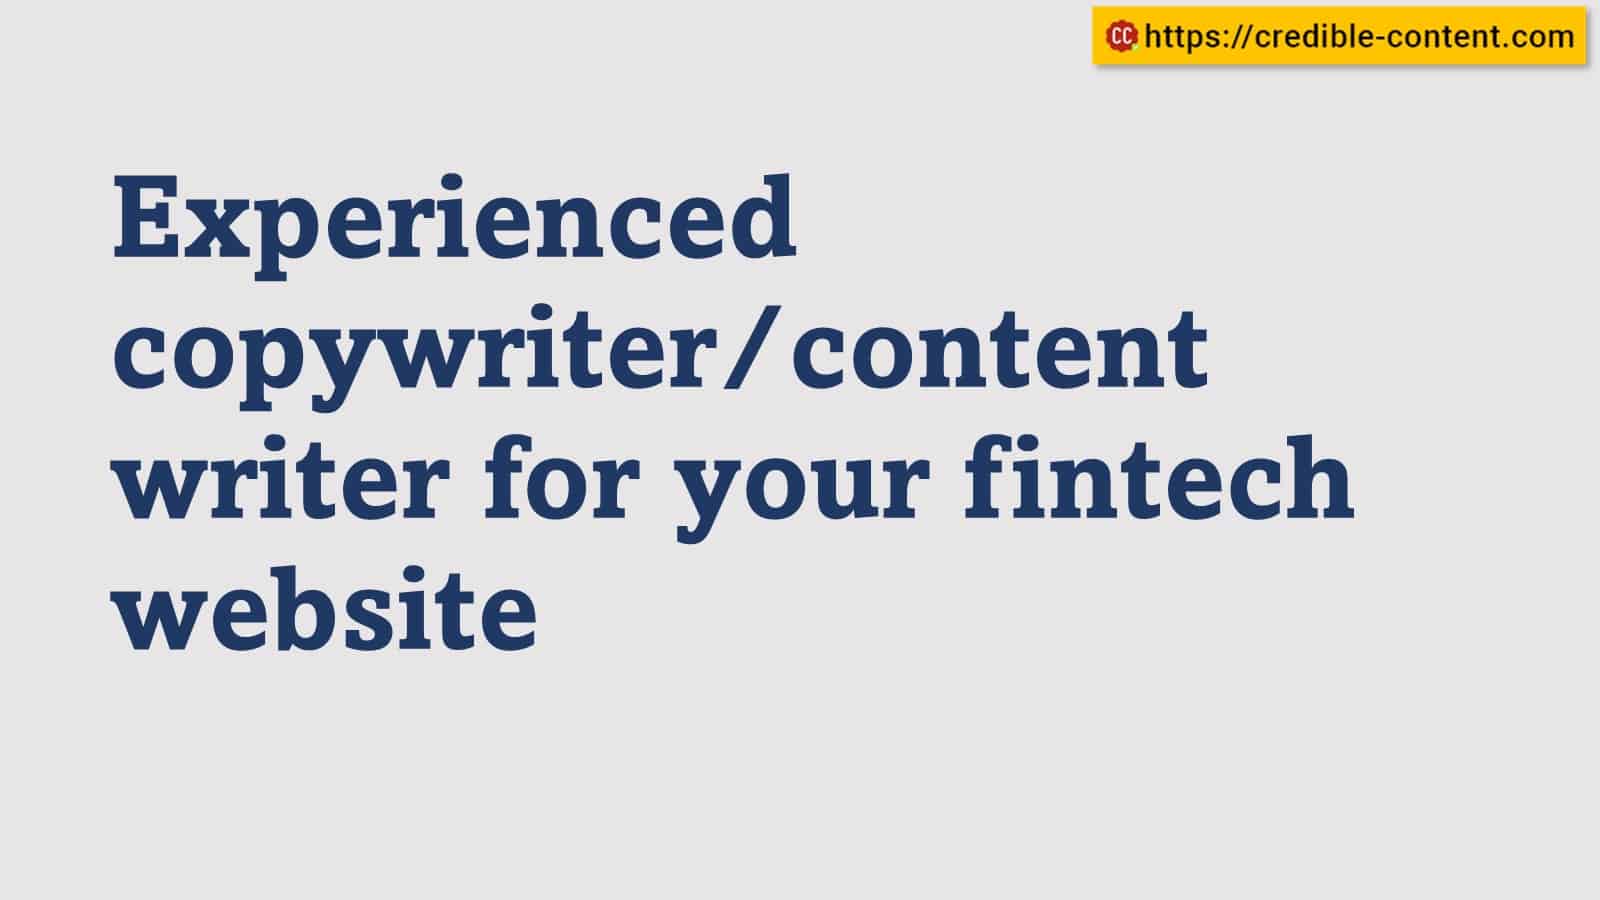 Experienced copywriter-content writer for your fintech website